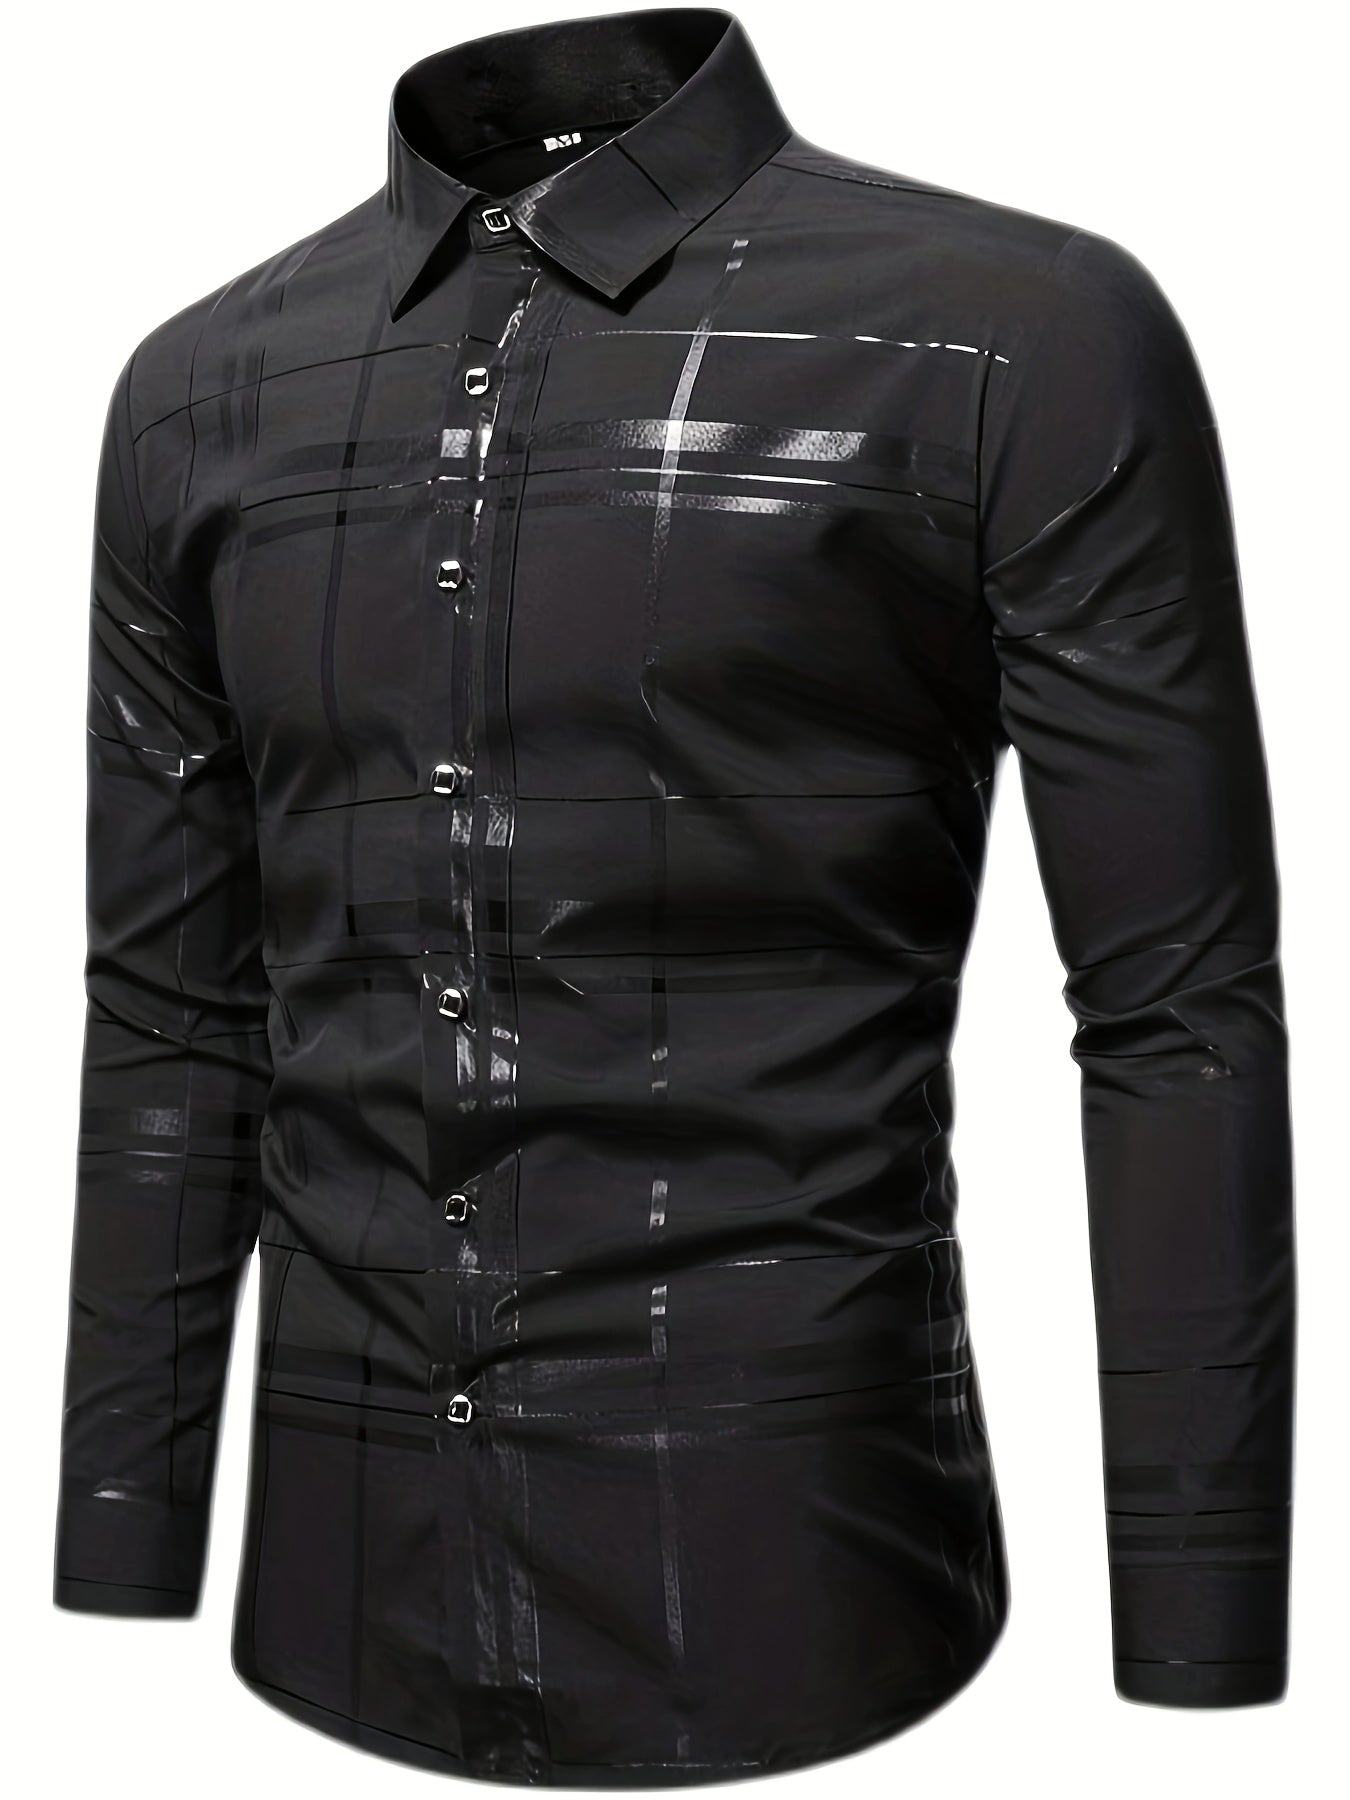 “Stylish Striped Men's Slim Fit Long Sleeve Button Up Shirt for Spring/Fall - Men's Clothing”